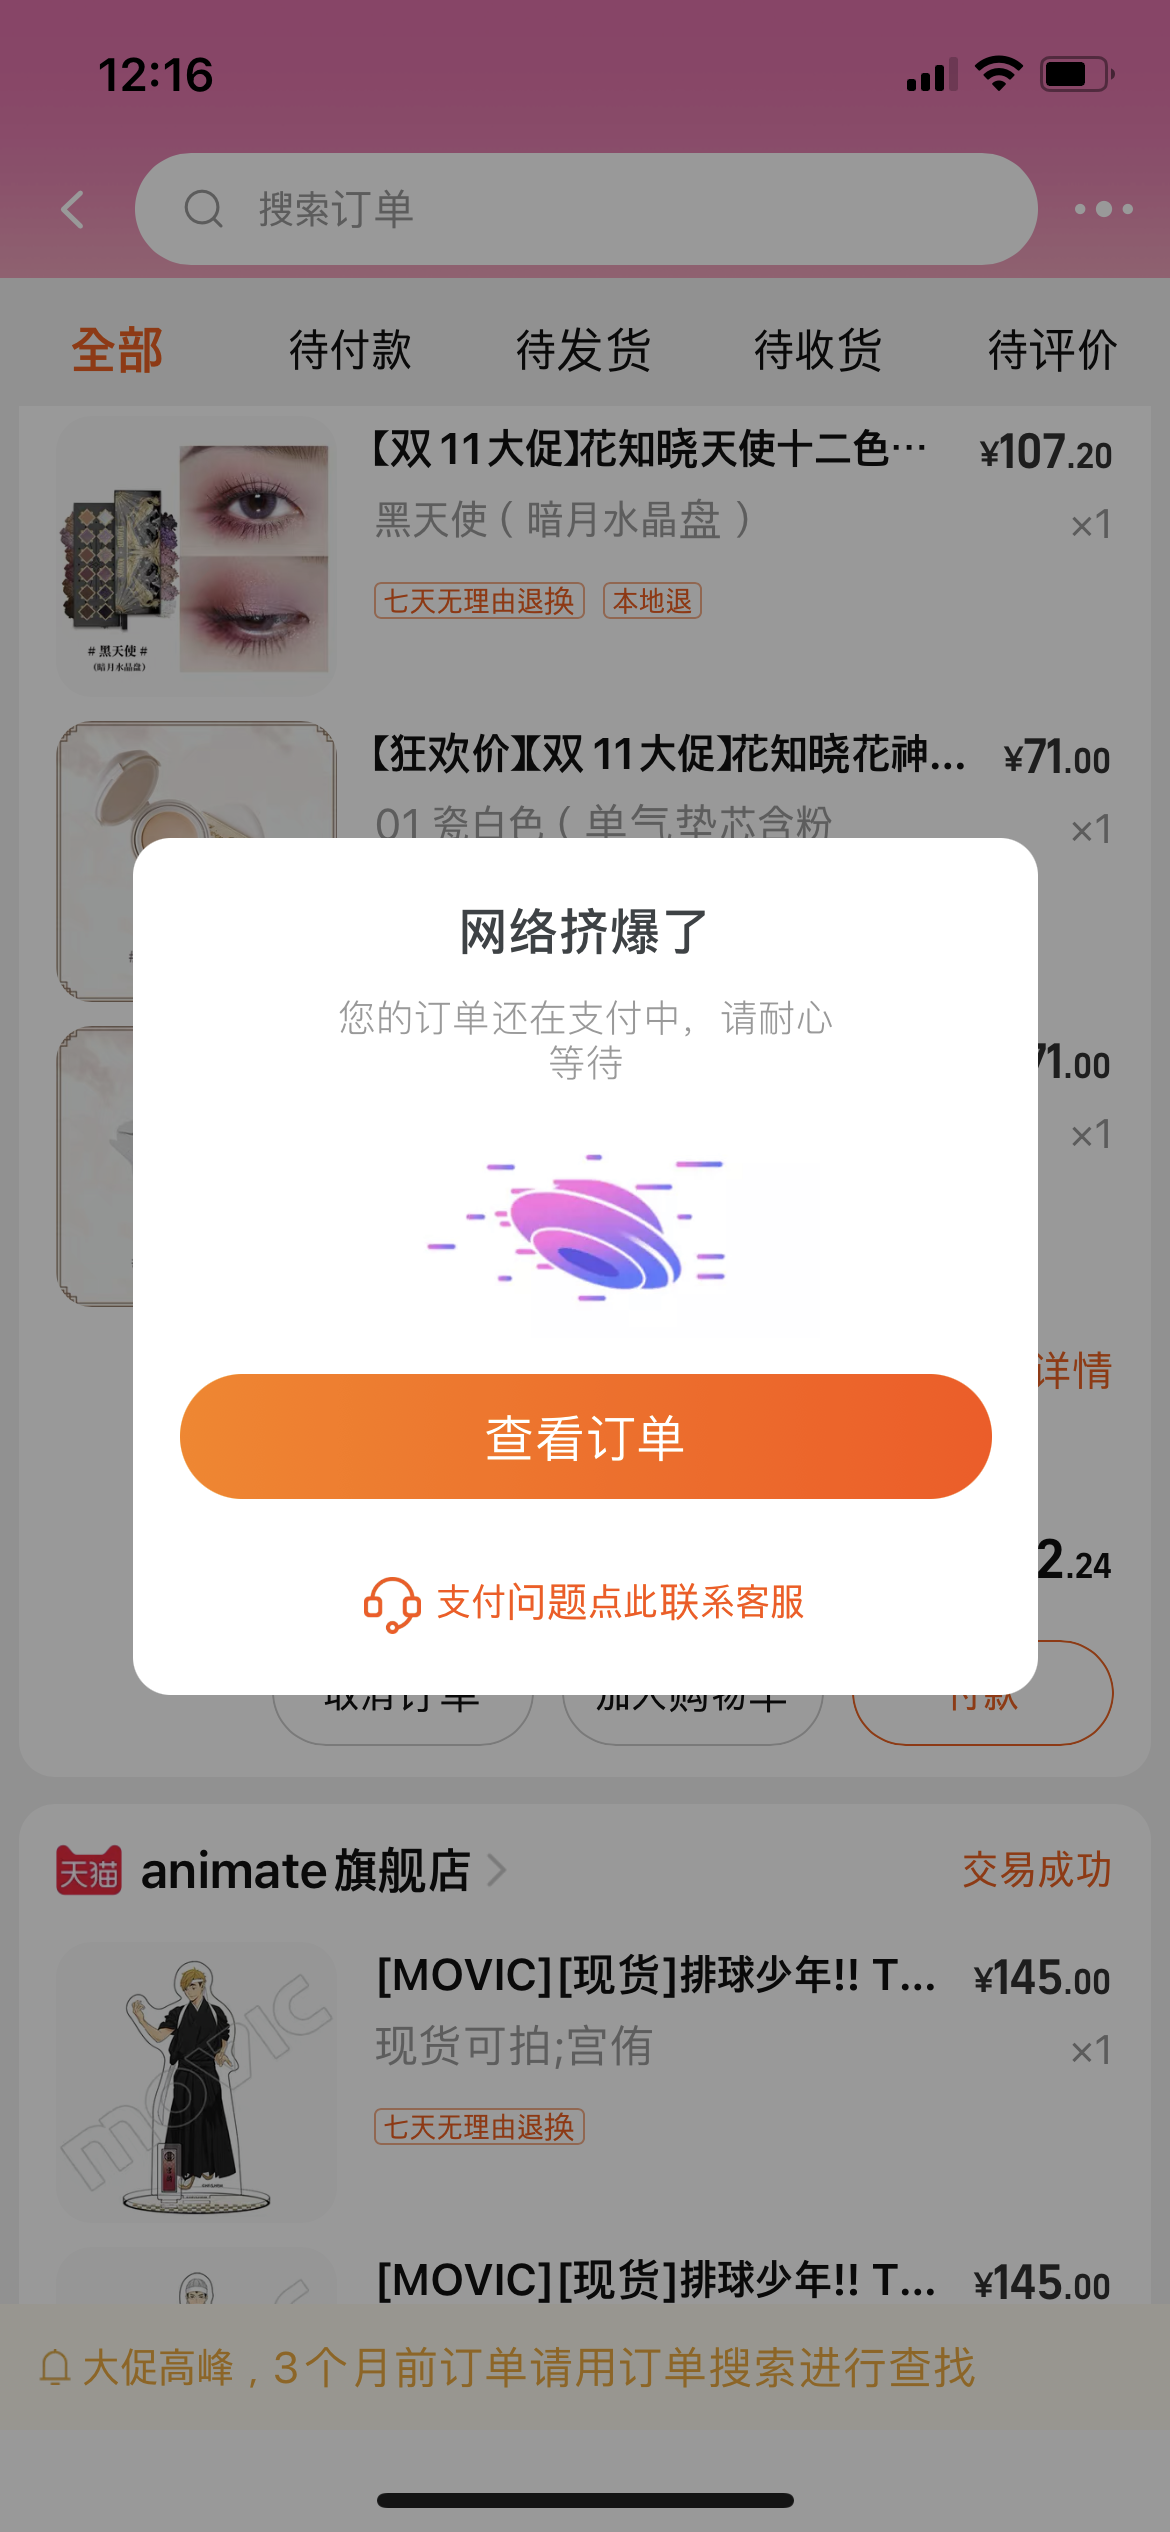 Alibaba's Taobao mobile shopping page on November 11, 2021.